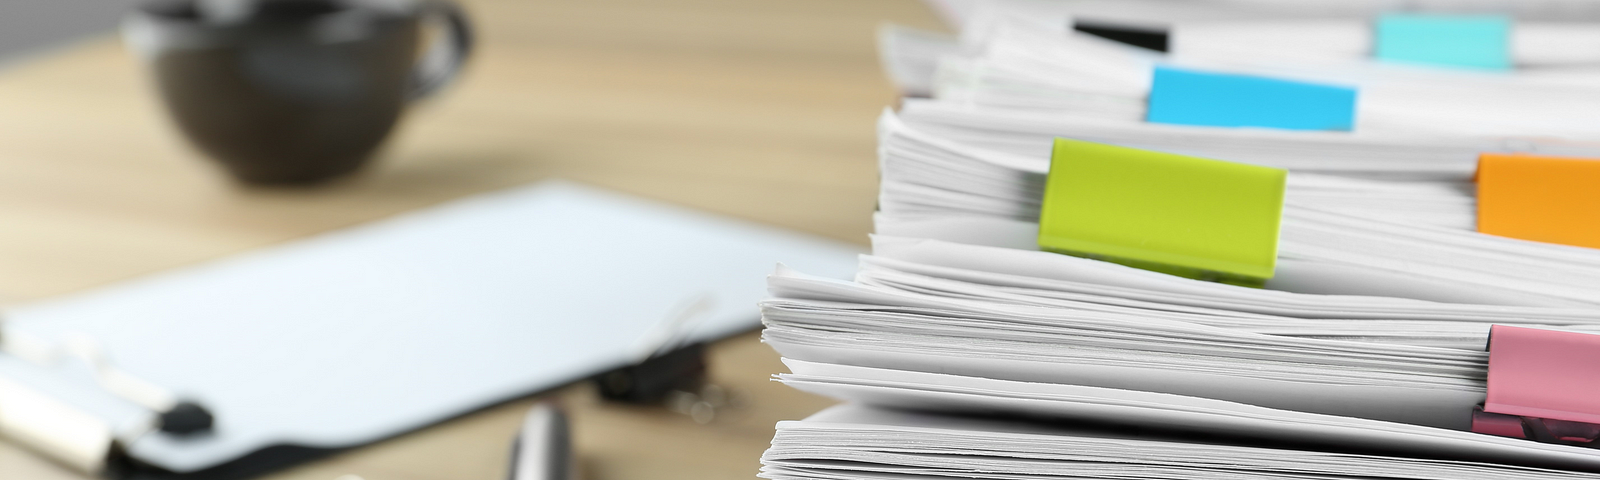 Stacks of papers held together with bulldog clips in the foreground. A pen, a clipboard and a coffee cup in the background.